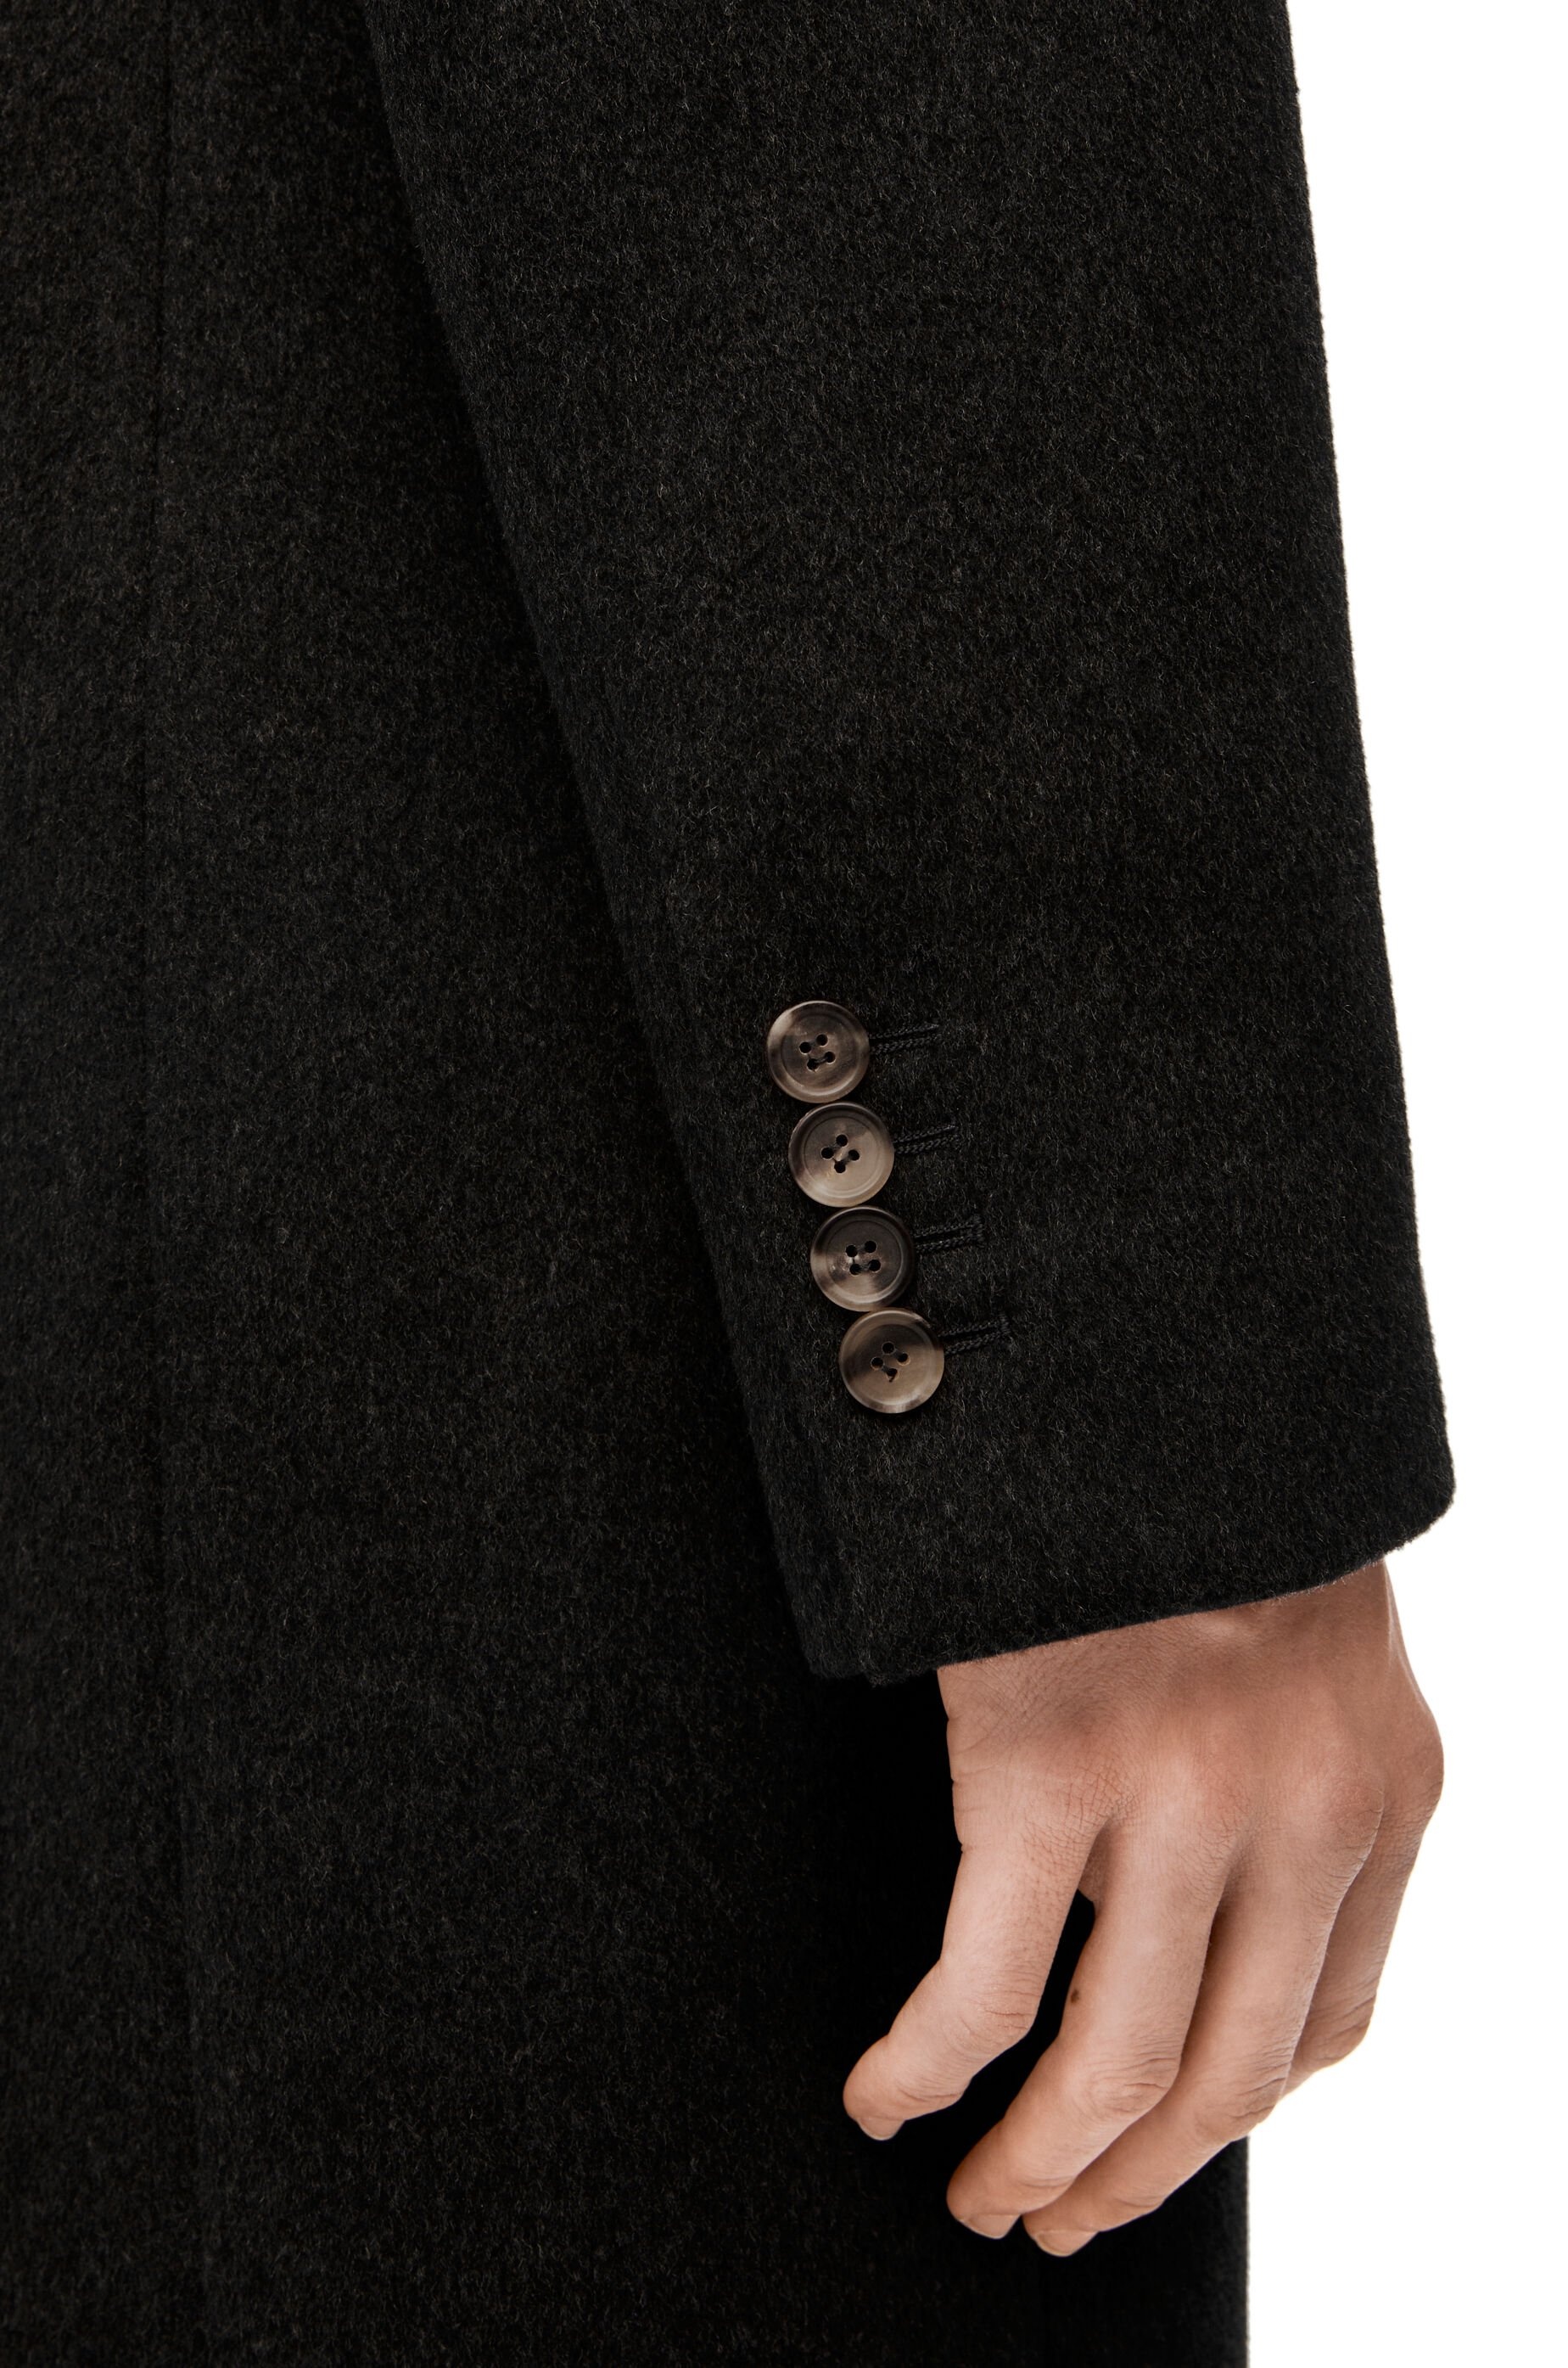 Loewe Men's Tailored Wool and Cashmere Coat